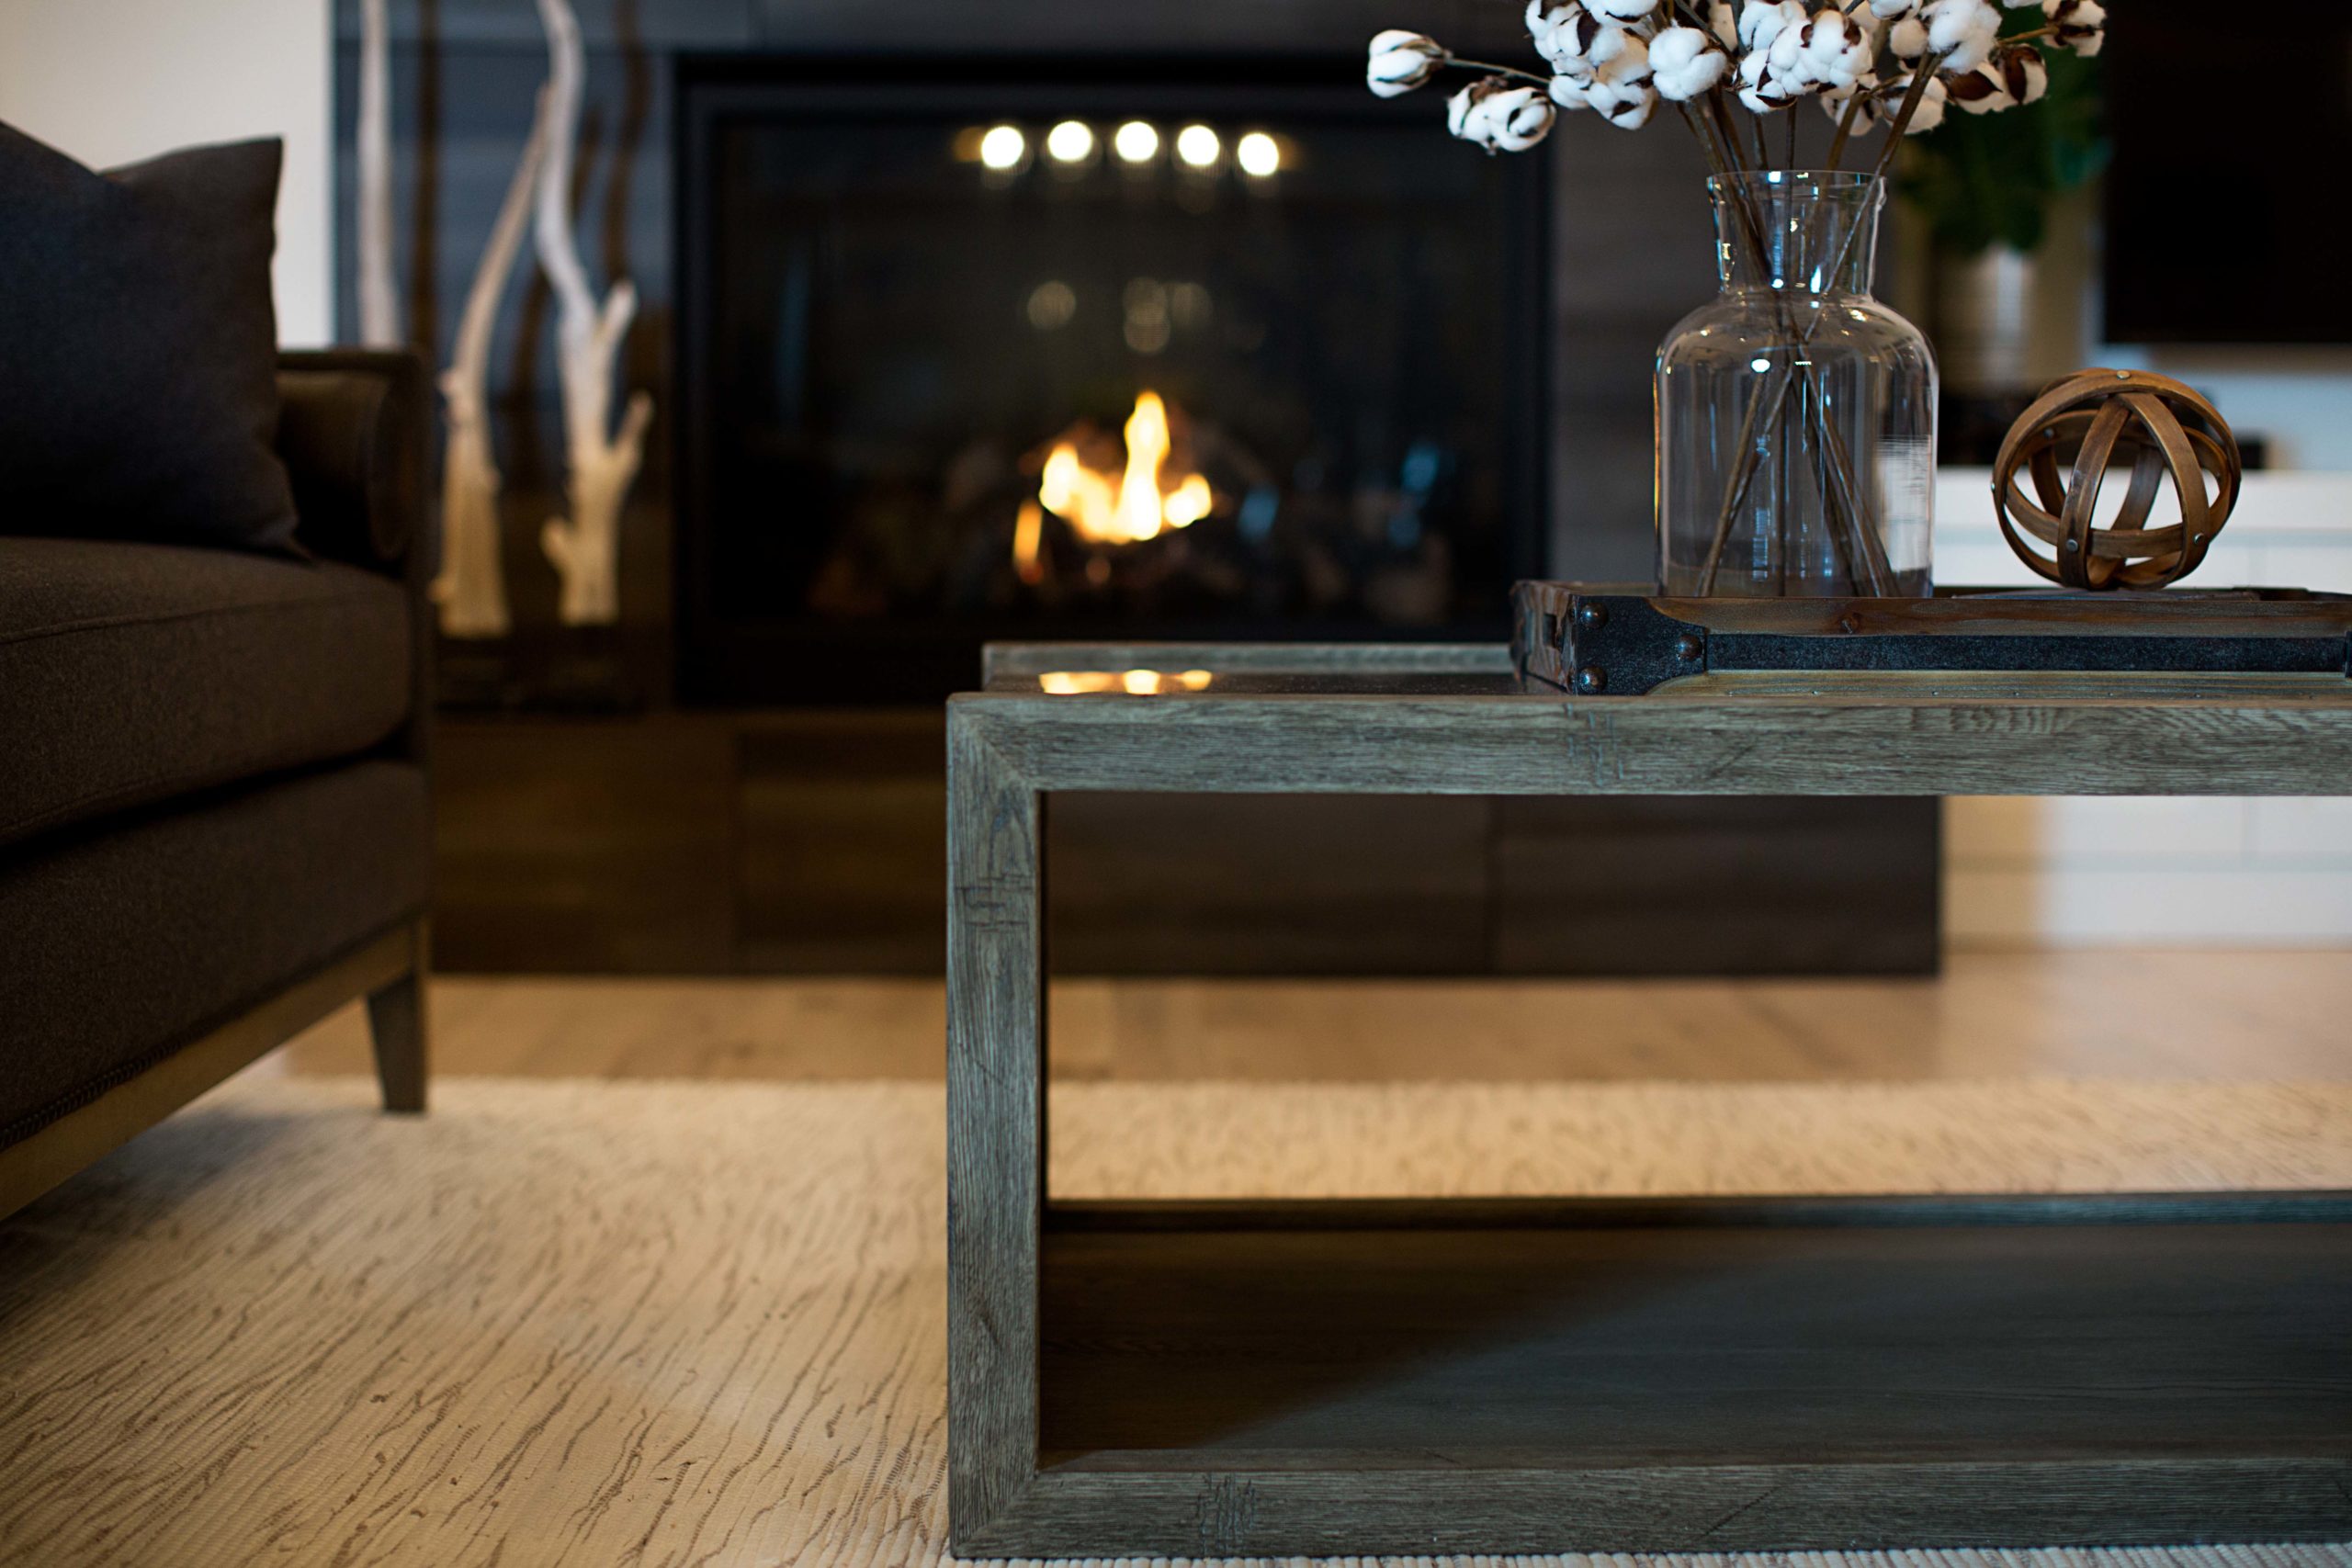 A coffee table in front of a fireplace.